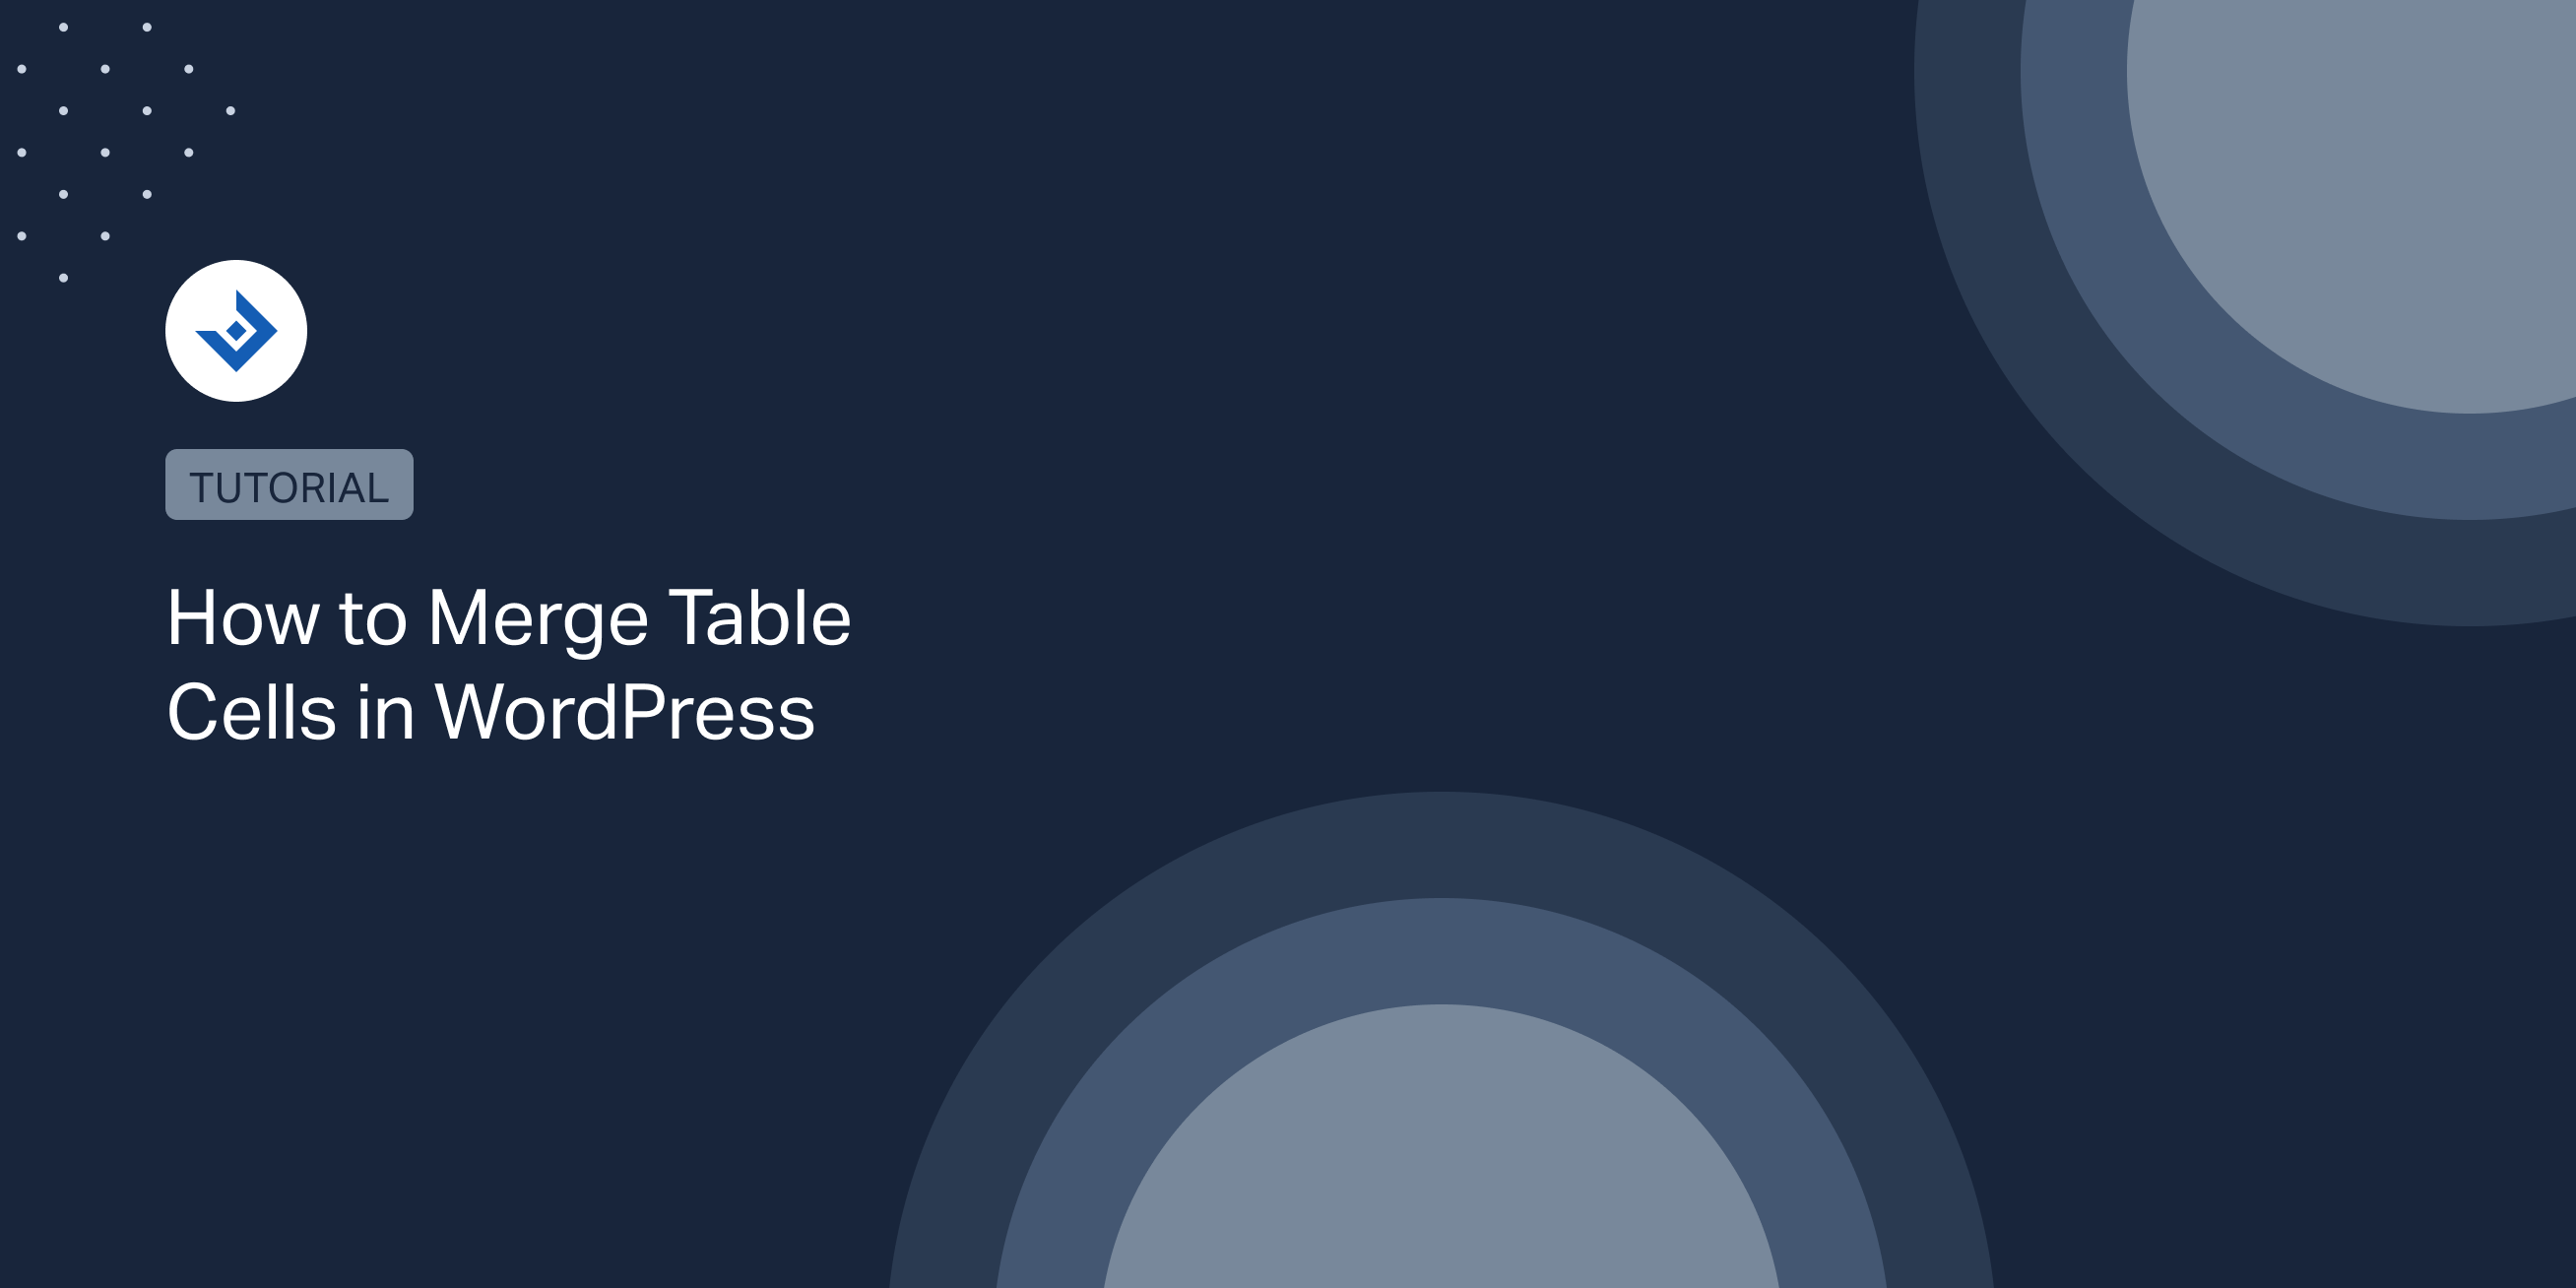 How to Merge Table Cells in WordPress